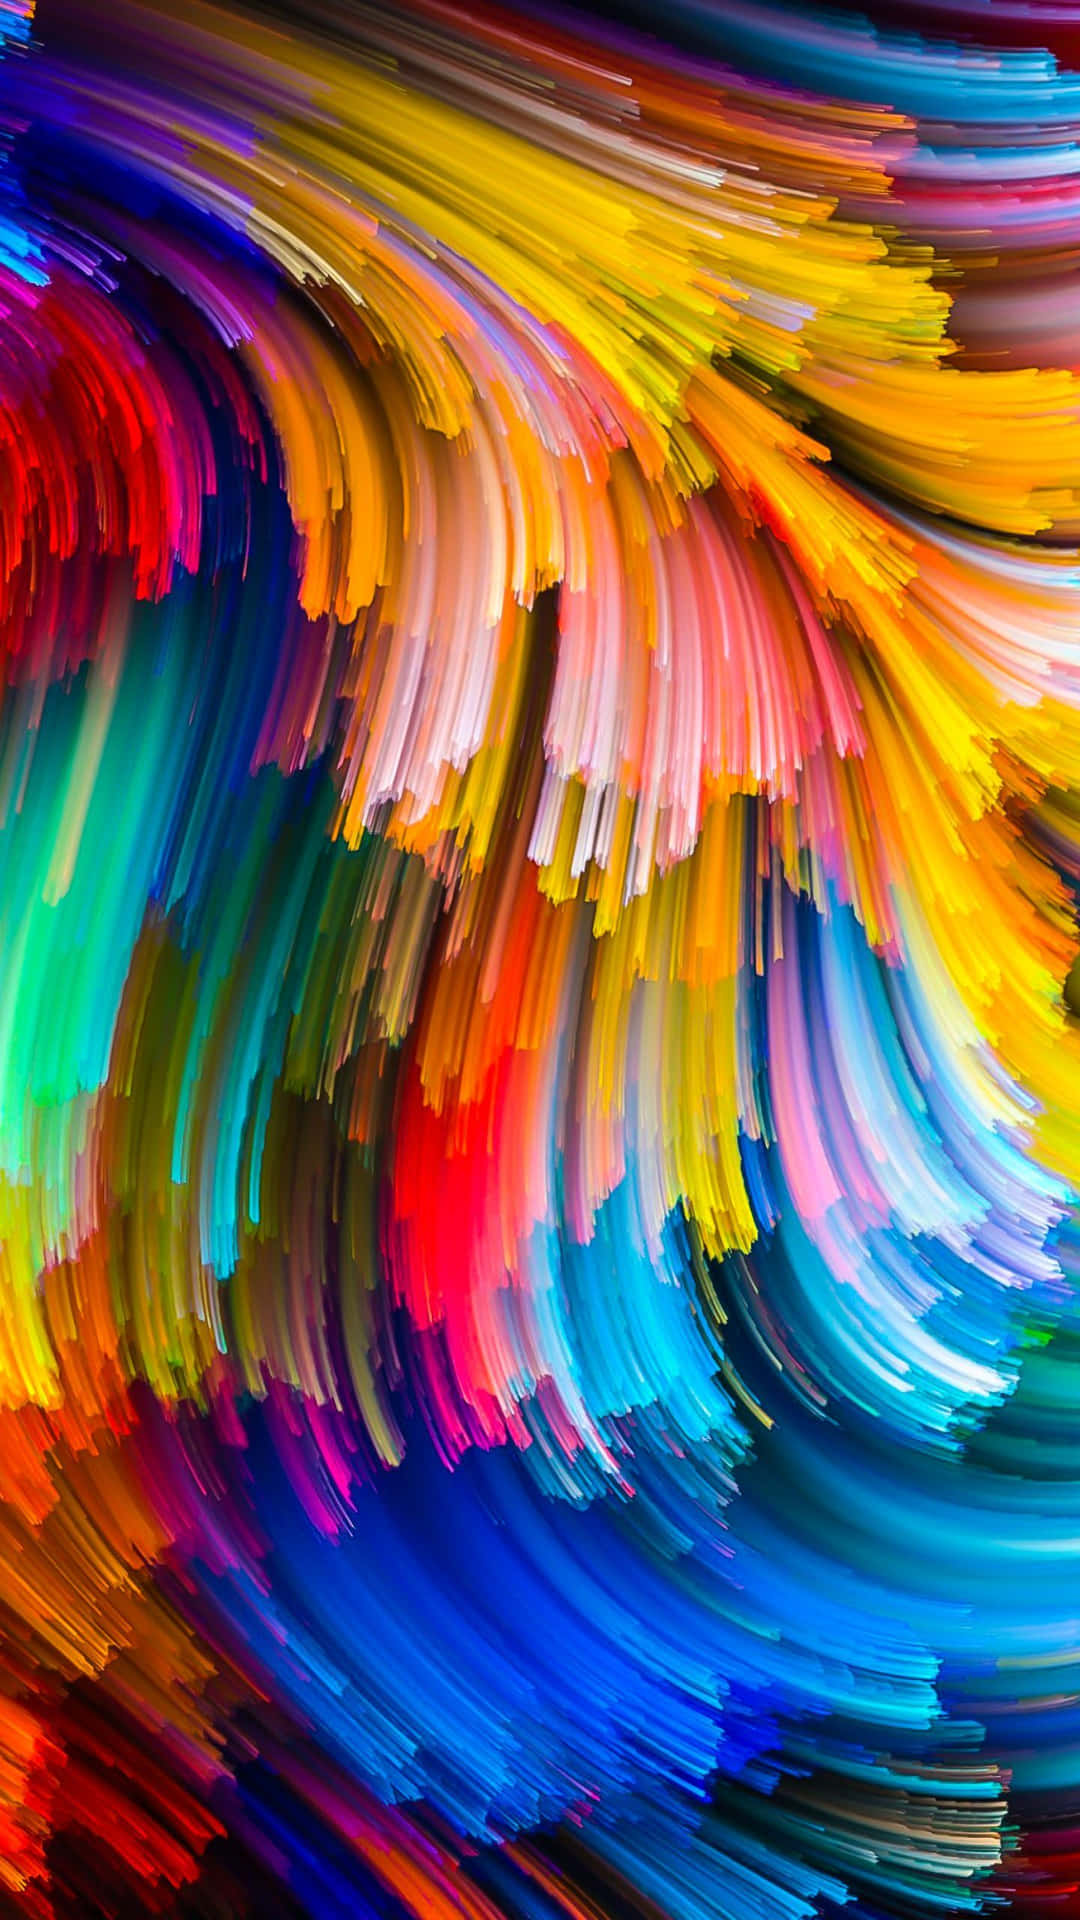 Explore the colors of technology with a Colorful Phone Wallpaper